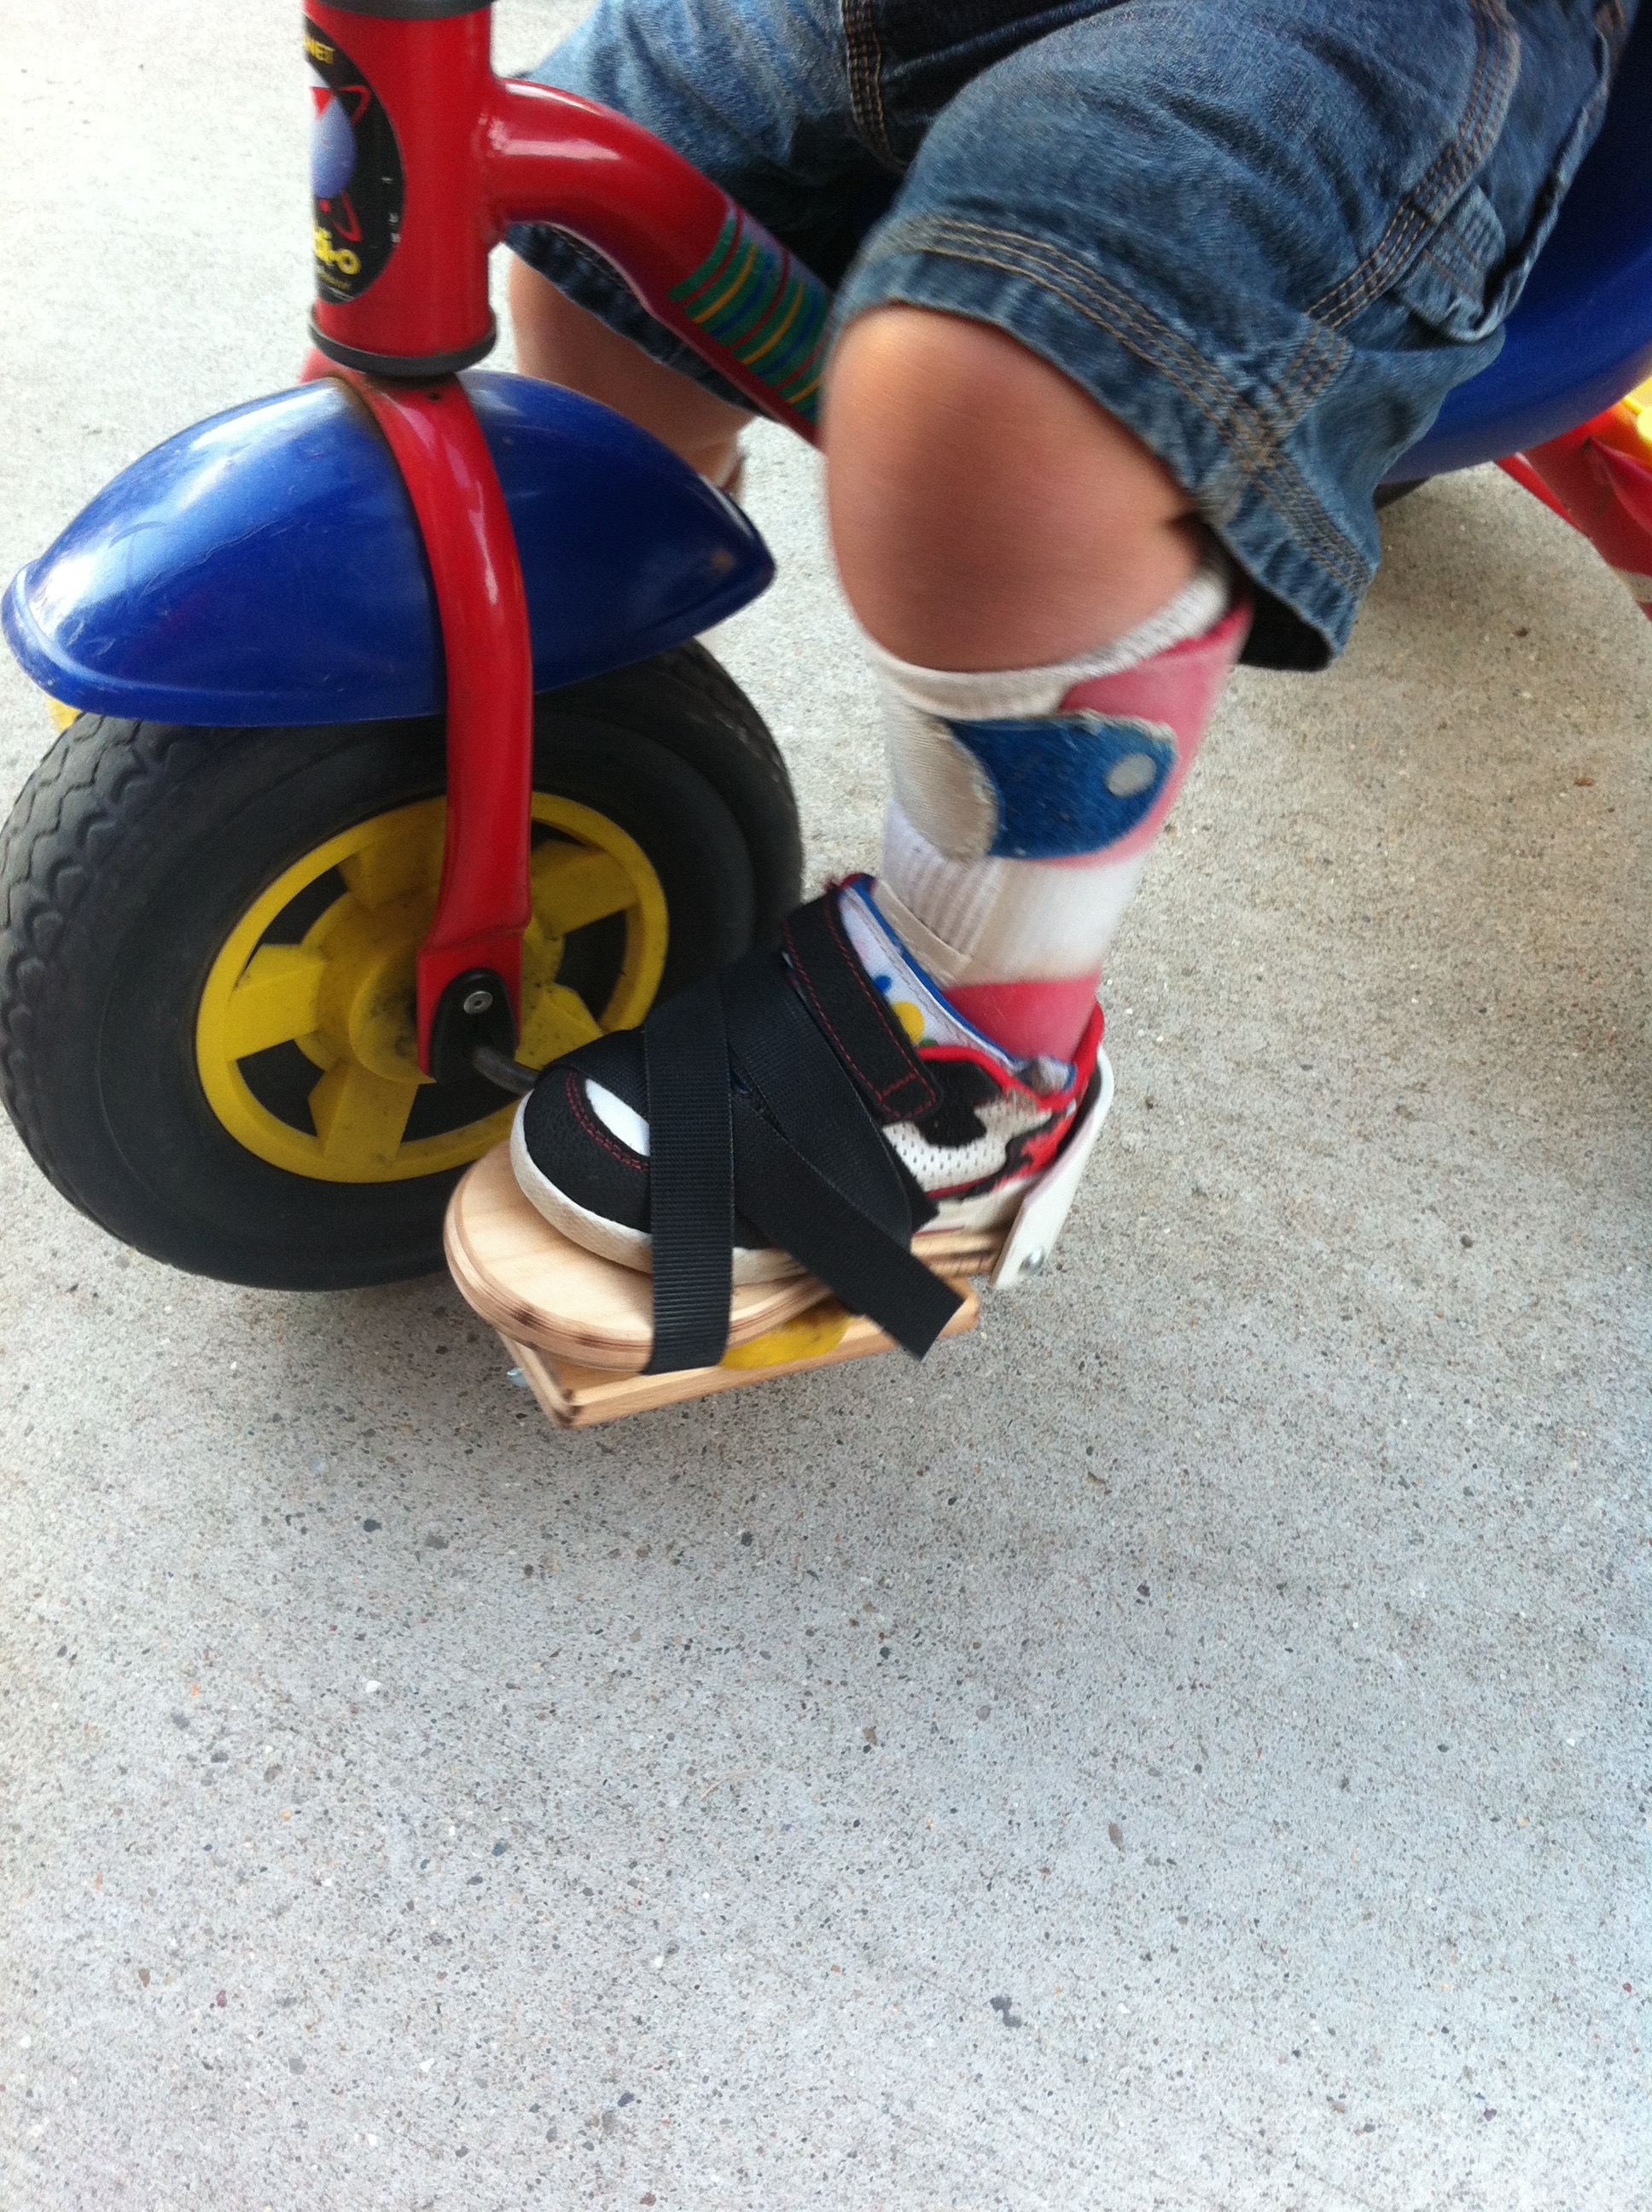 tricycle pedals